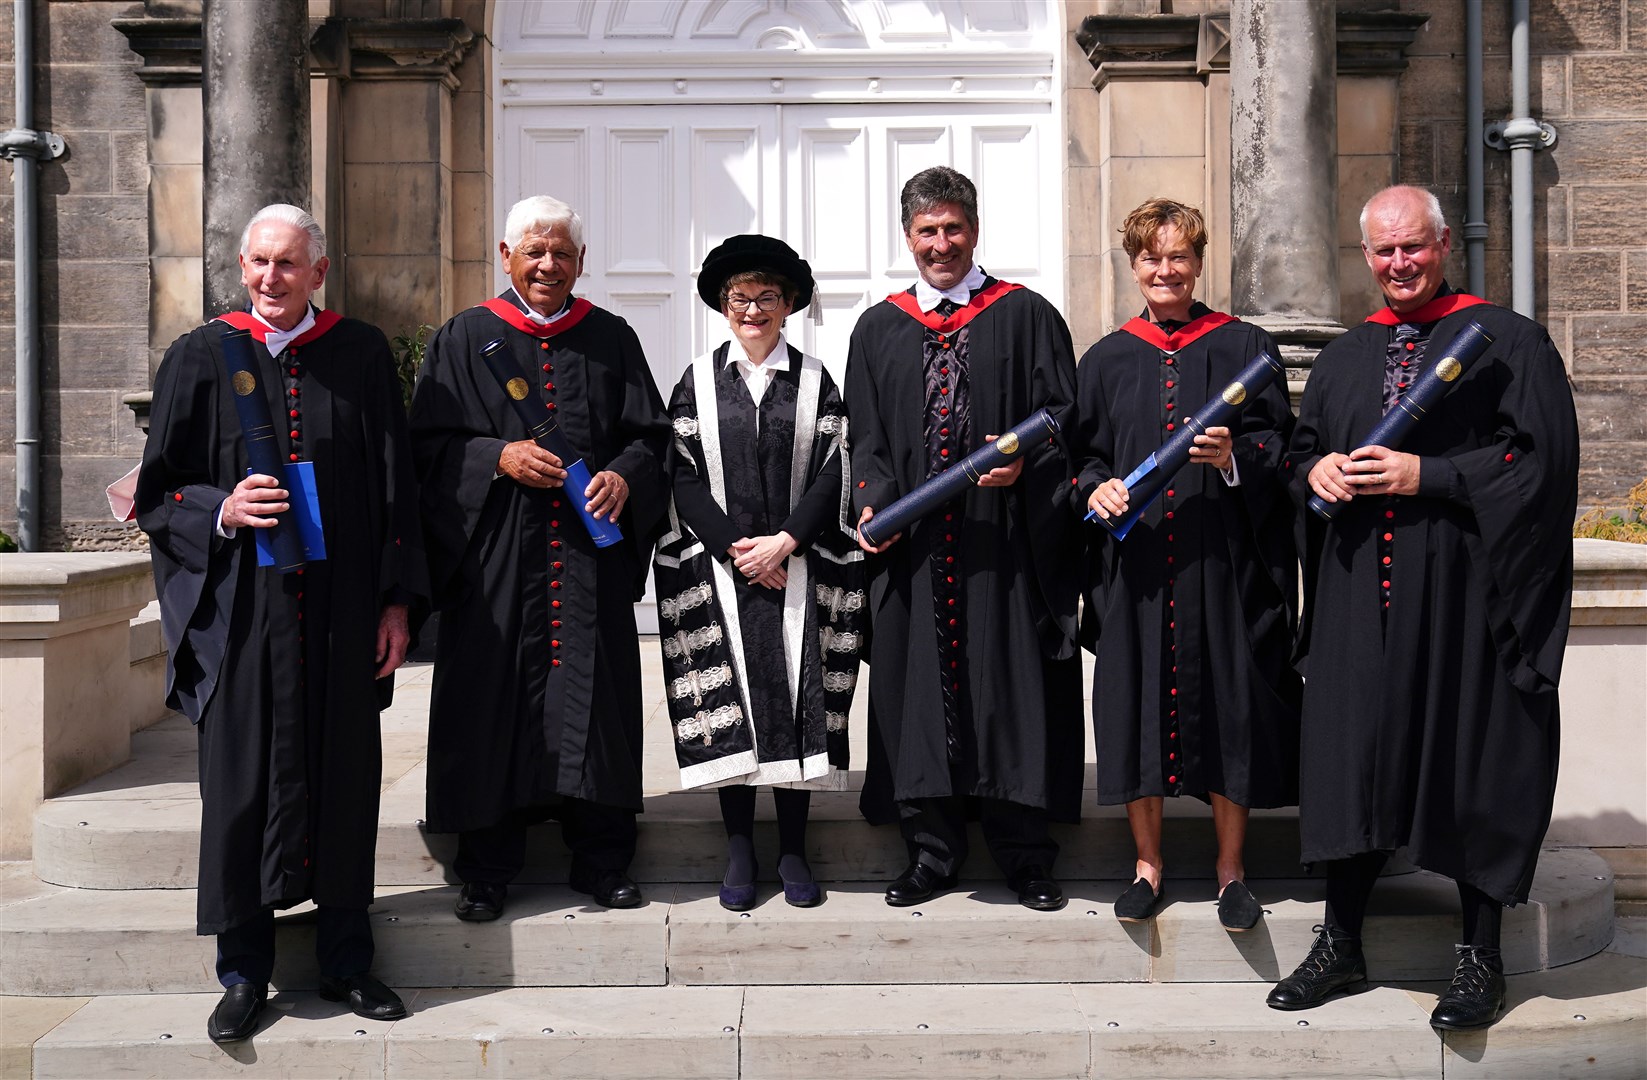 Sir Bob Charles, Lee Trevino, Jose Maria Olazabal, Catriona Matthew and Sandy Lyle were given Honorary Degrees of Doctor of Laws during a ceremony at Younger Hall, St Andrews (Jane Barlow/PA)